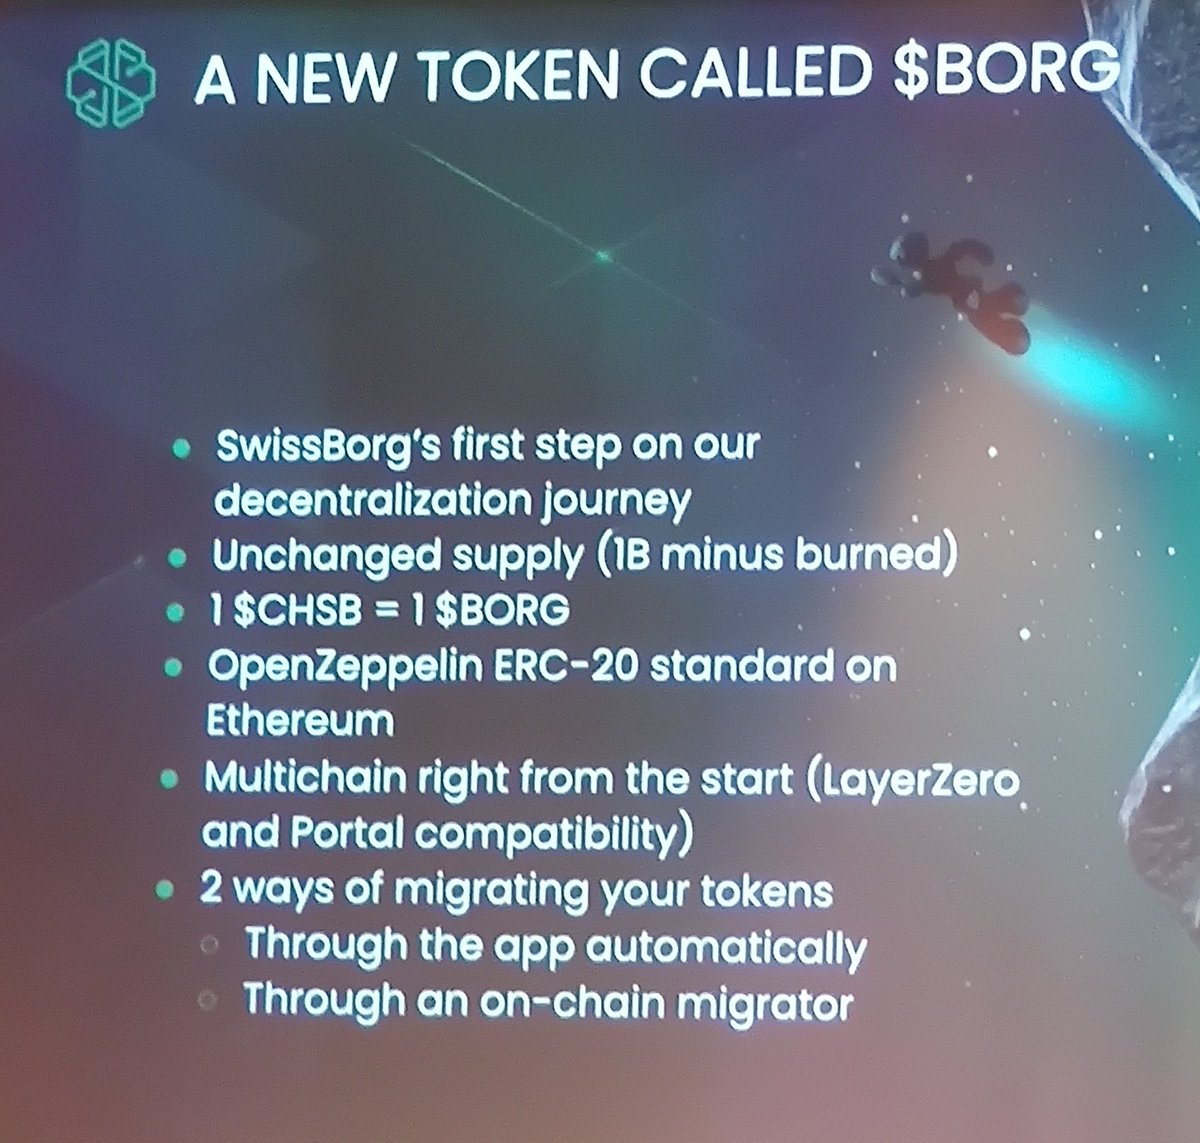 The #CHSB token will be automatically replaced by the #Borg in the app between September and October 2023.

• Supply unchanged
• 1 CHSB for 1 BORG
•  Multichain! 

#WeAreSwissborg